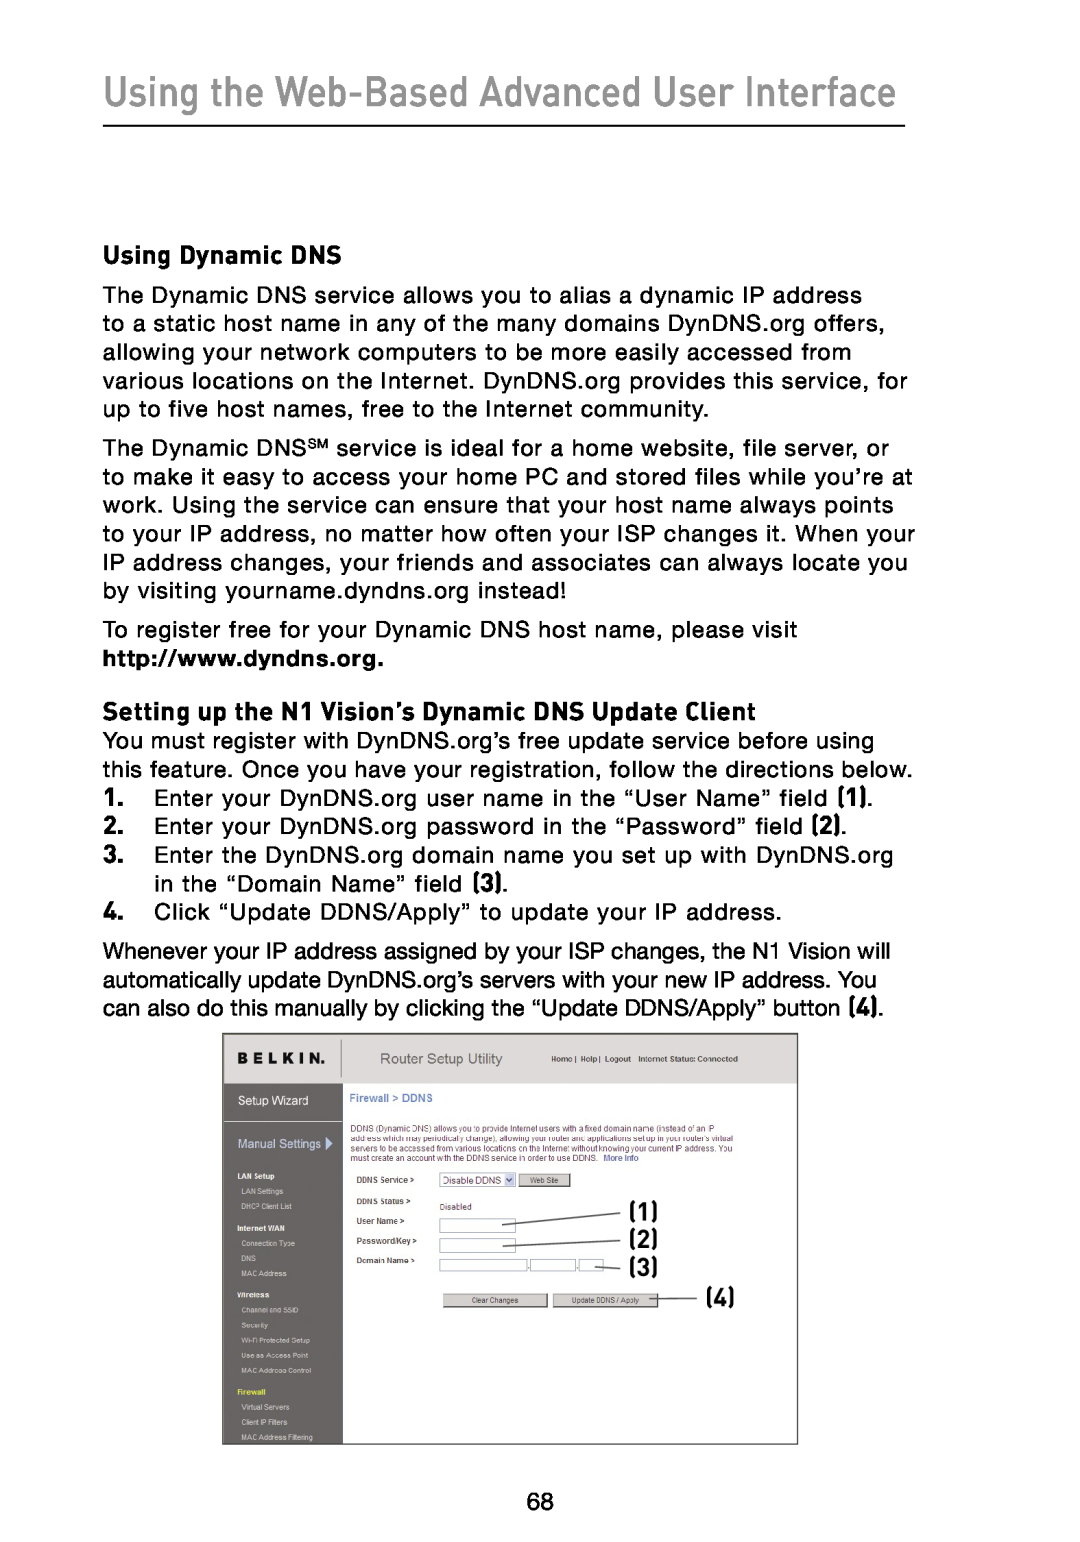 Belkin user manual Using Dynamic DNS, Setting up the N1 Vision’s Dynamic DNS Update Client 